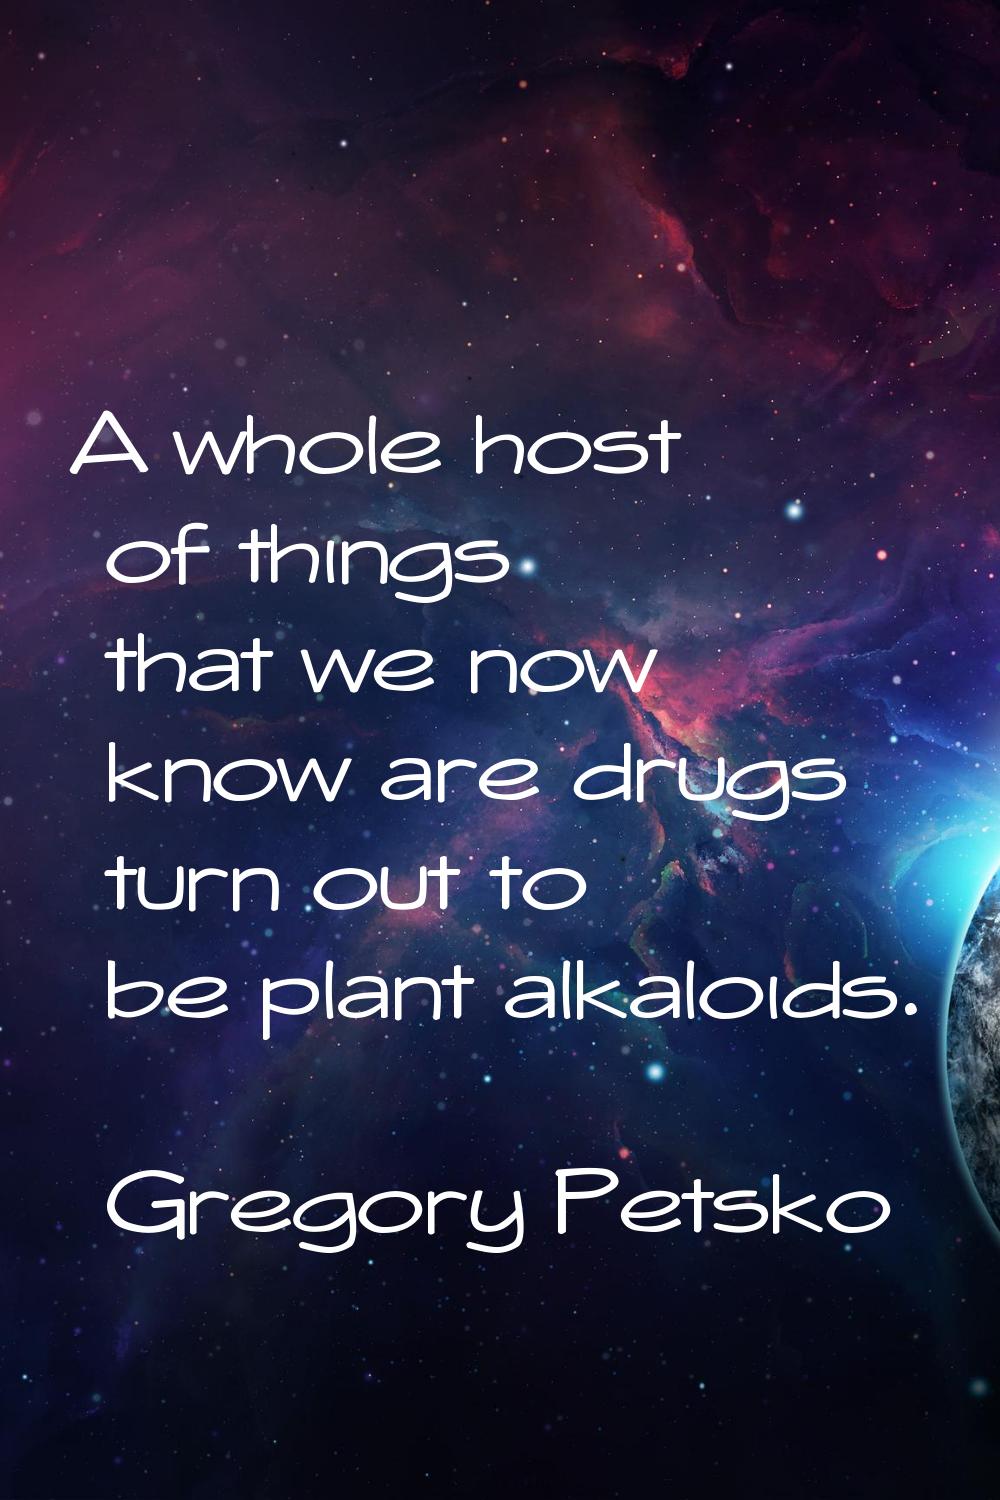 A whole host of things that we now know are drugs turn out to be plant alkaloids.